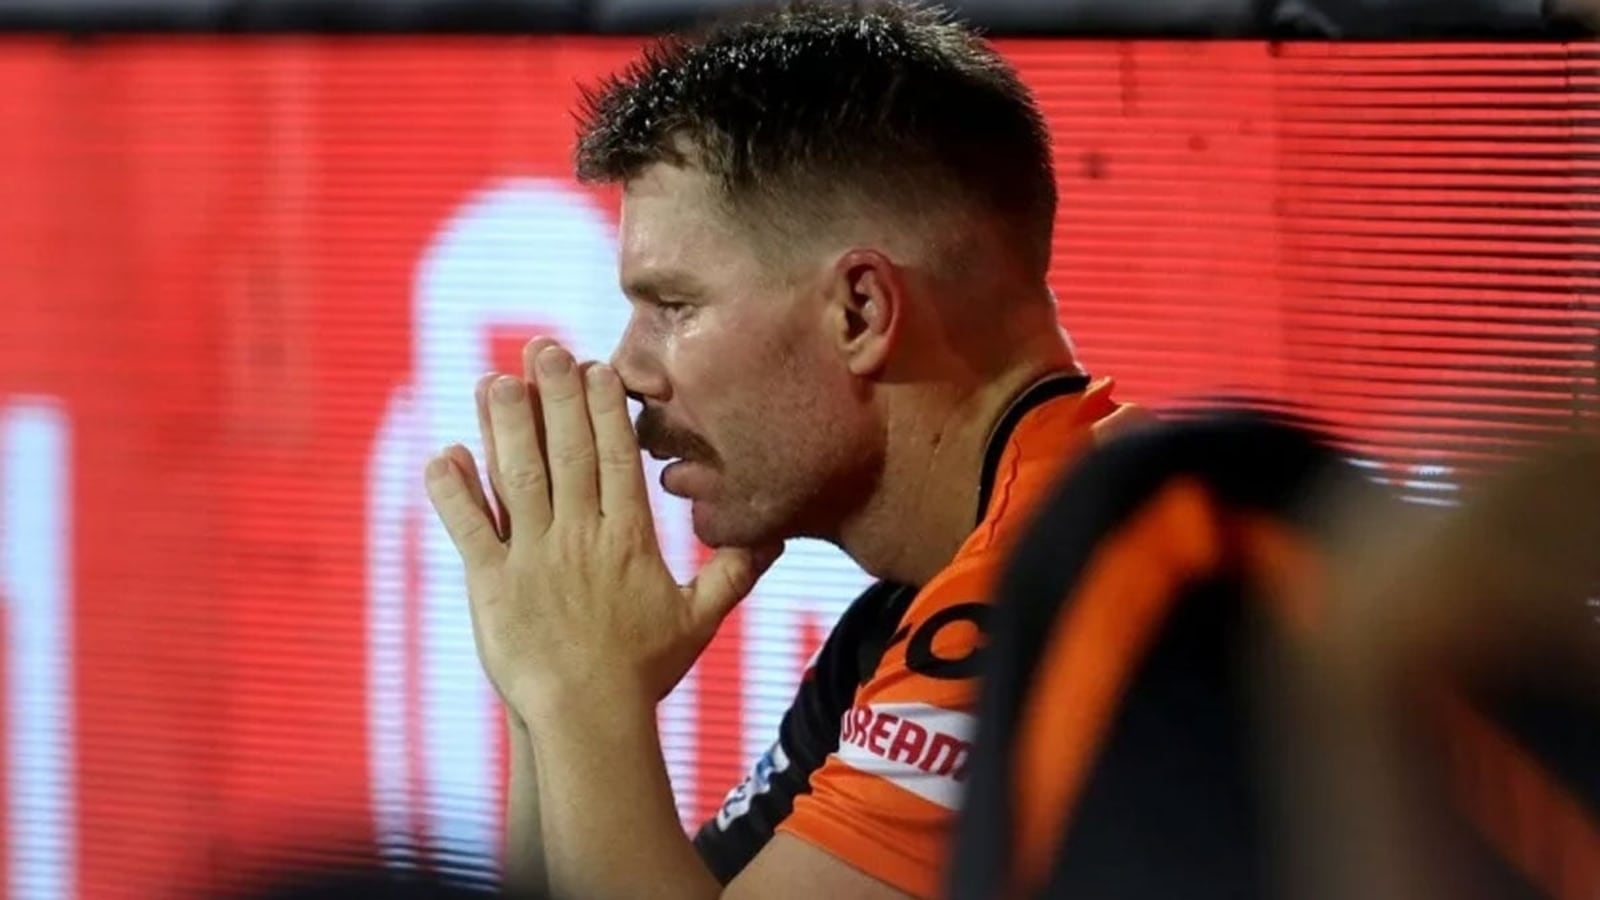 Difficult pill to swallow' - David Warner says he was not explained why he  was dropped as Sunrisers Hyderabad captain | Cricket - Hindustan Times